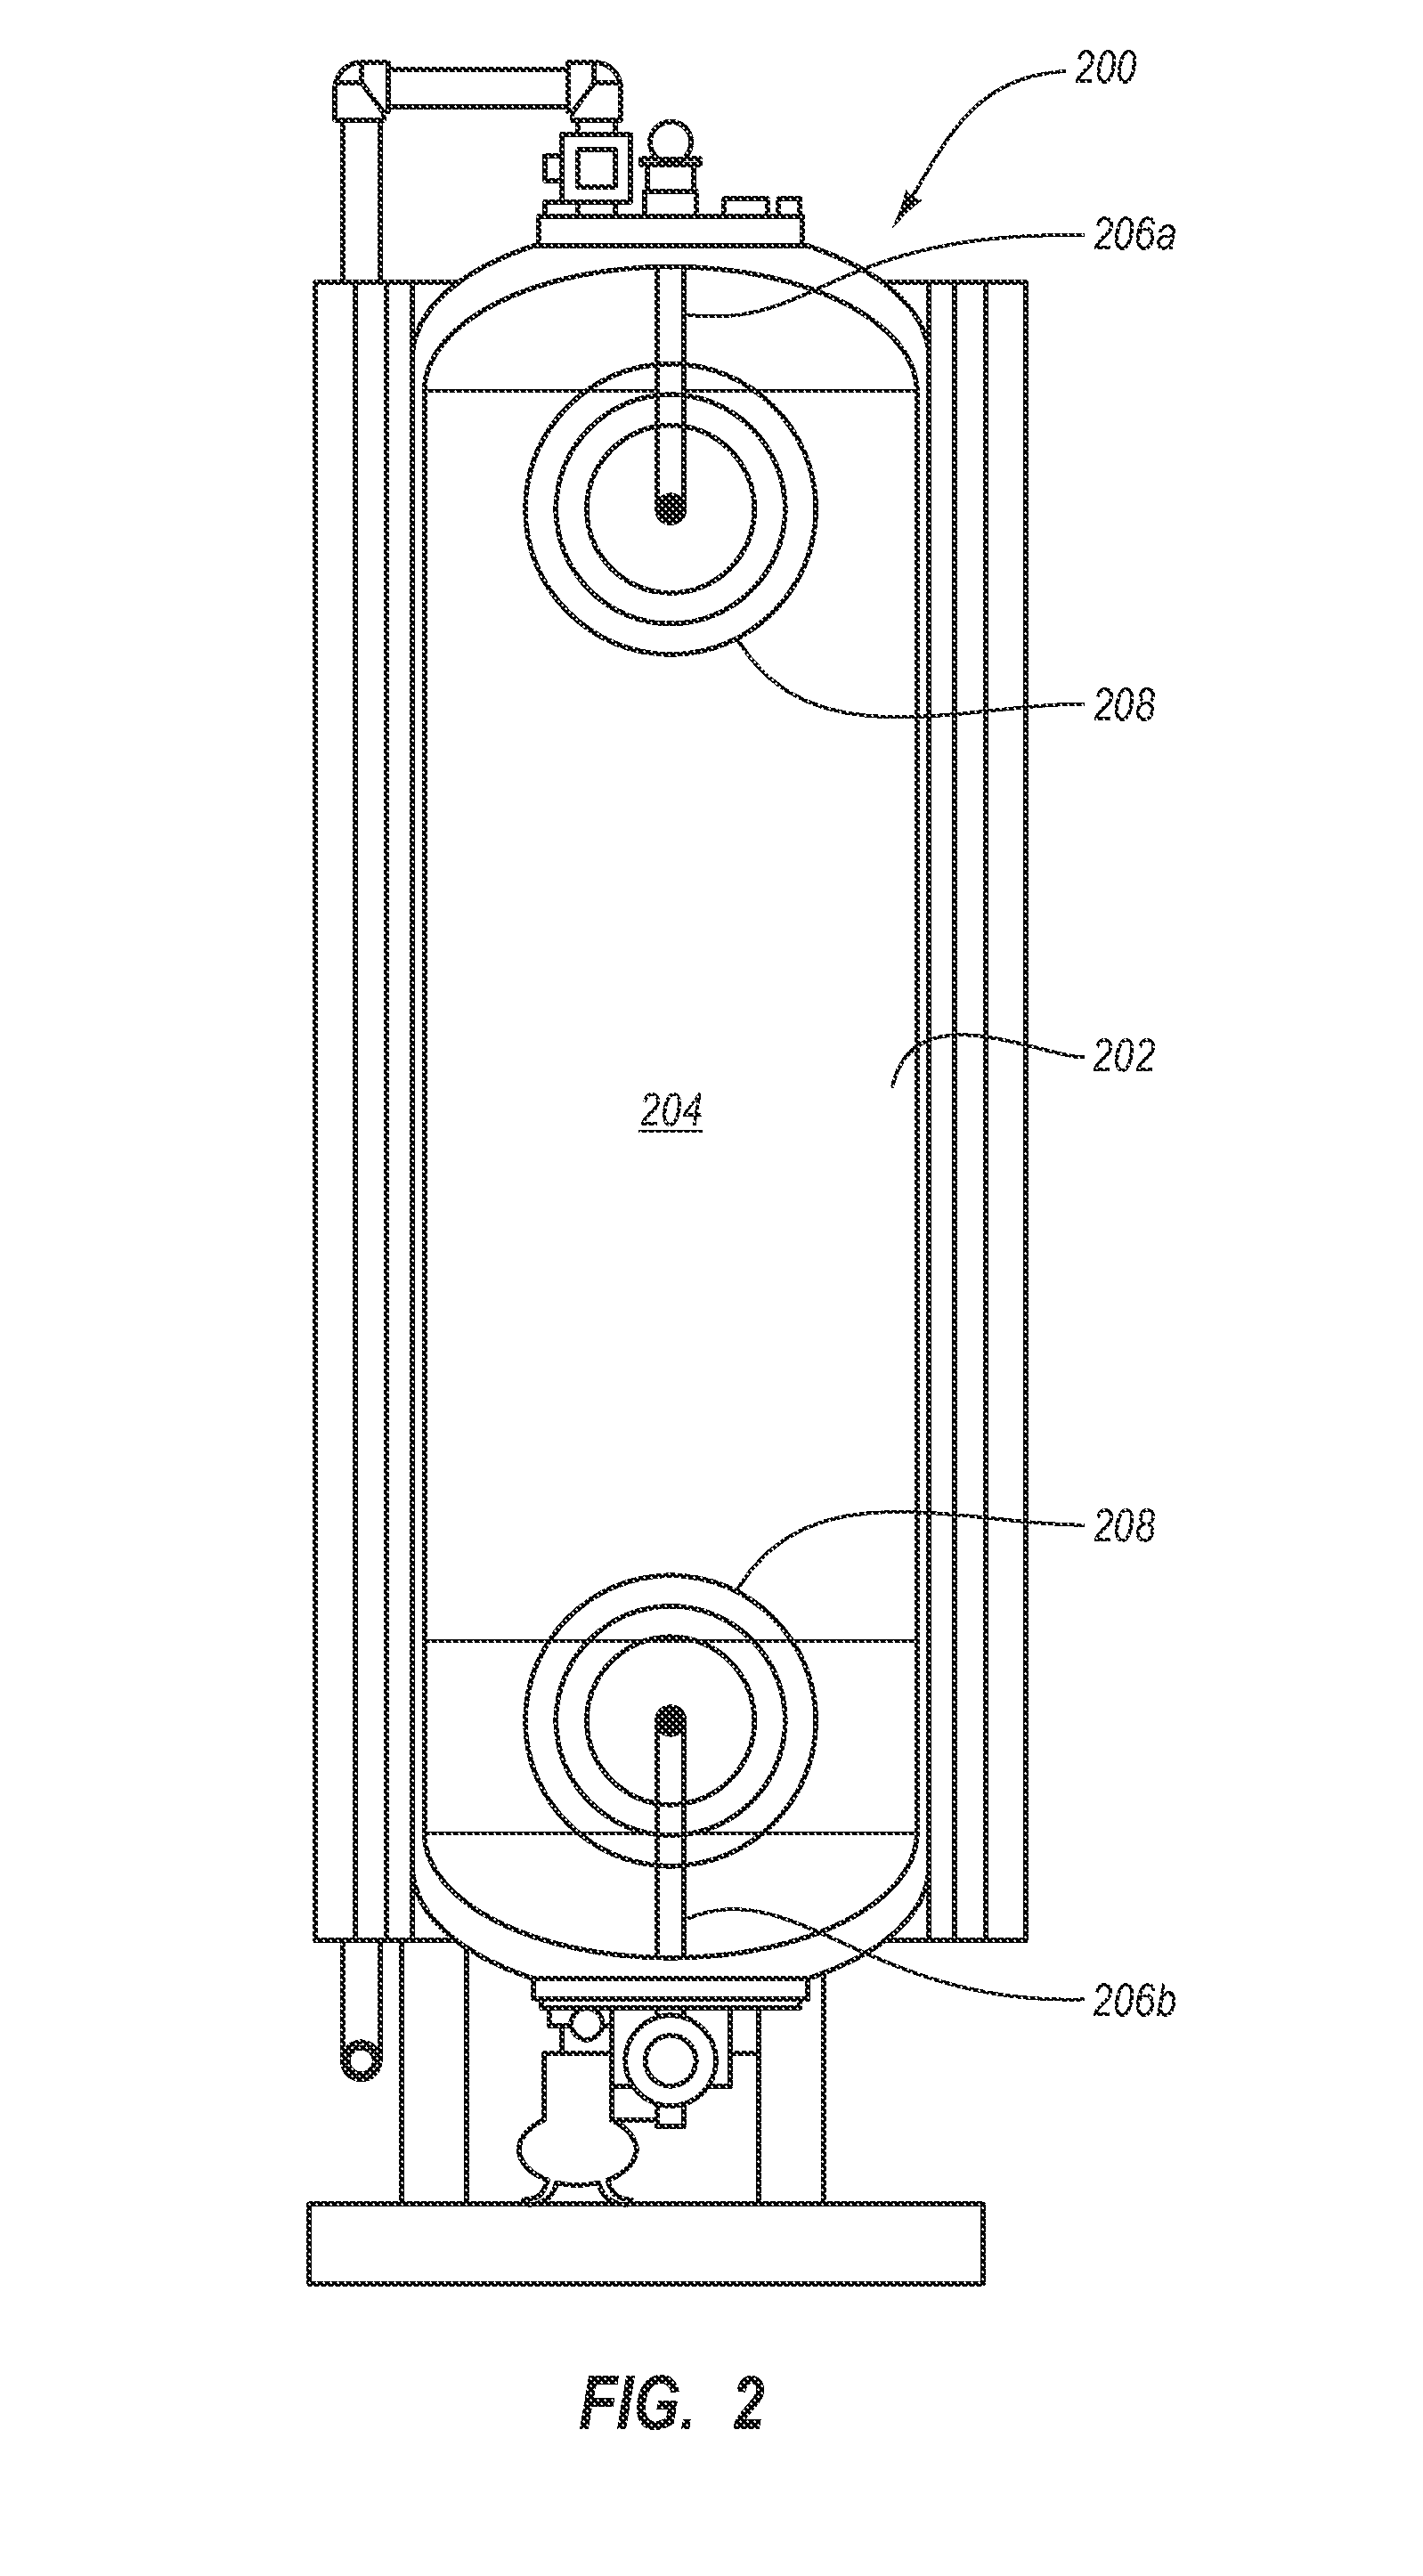 Method and system for oxidatively increasing cetane number of hydrocarbon fuel